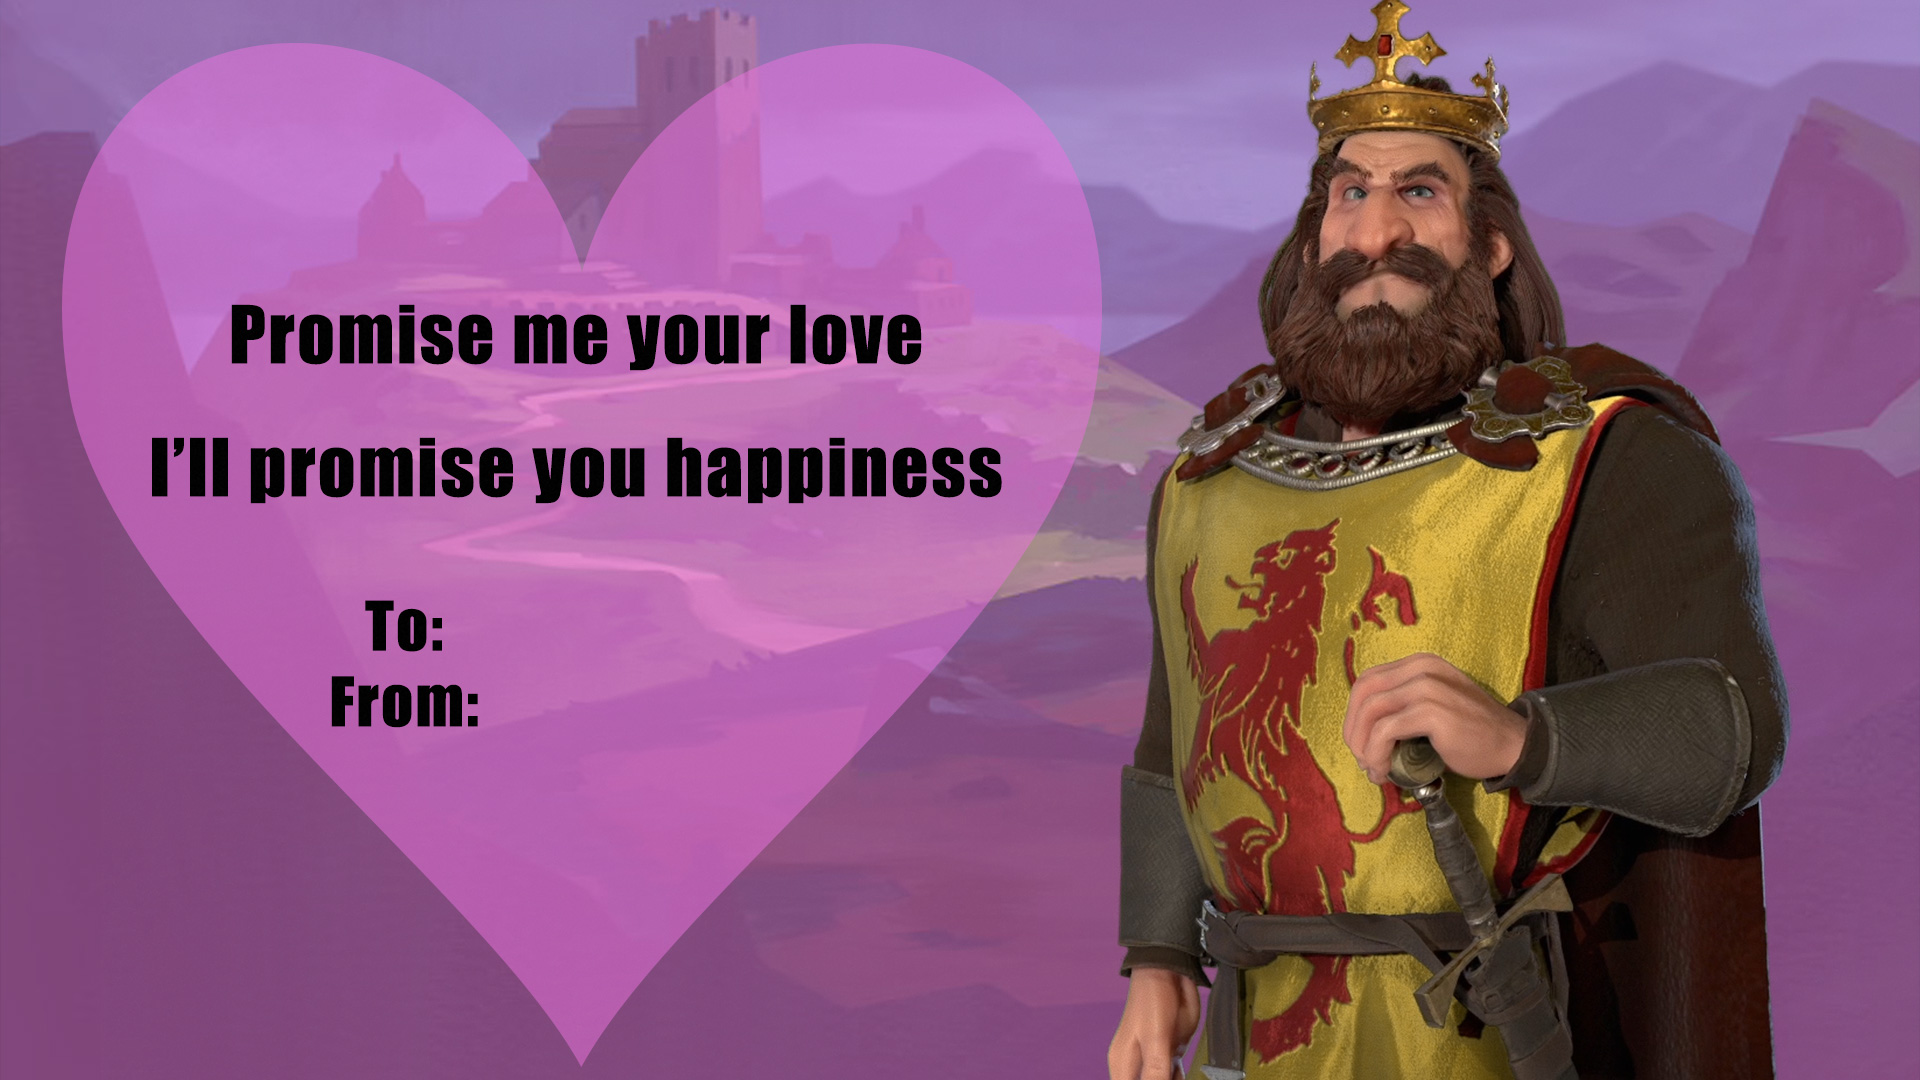 Robert The Bruce: Promise me your love, I'll promise you happiness